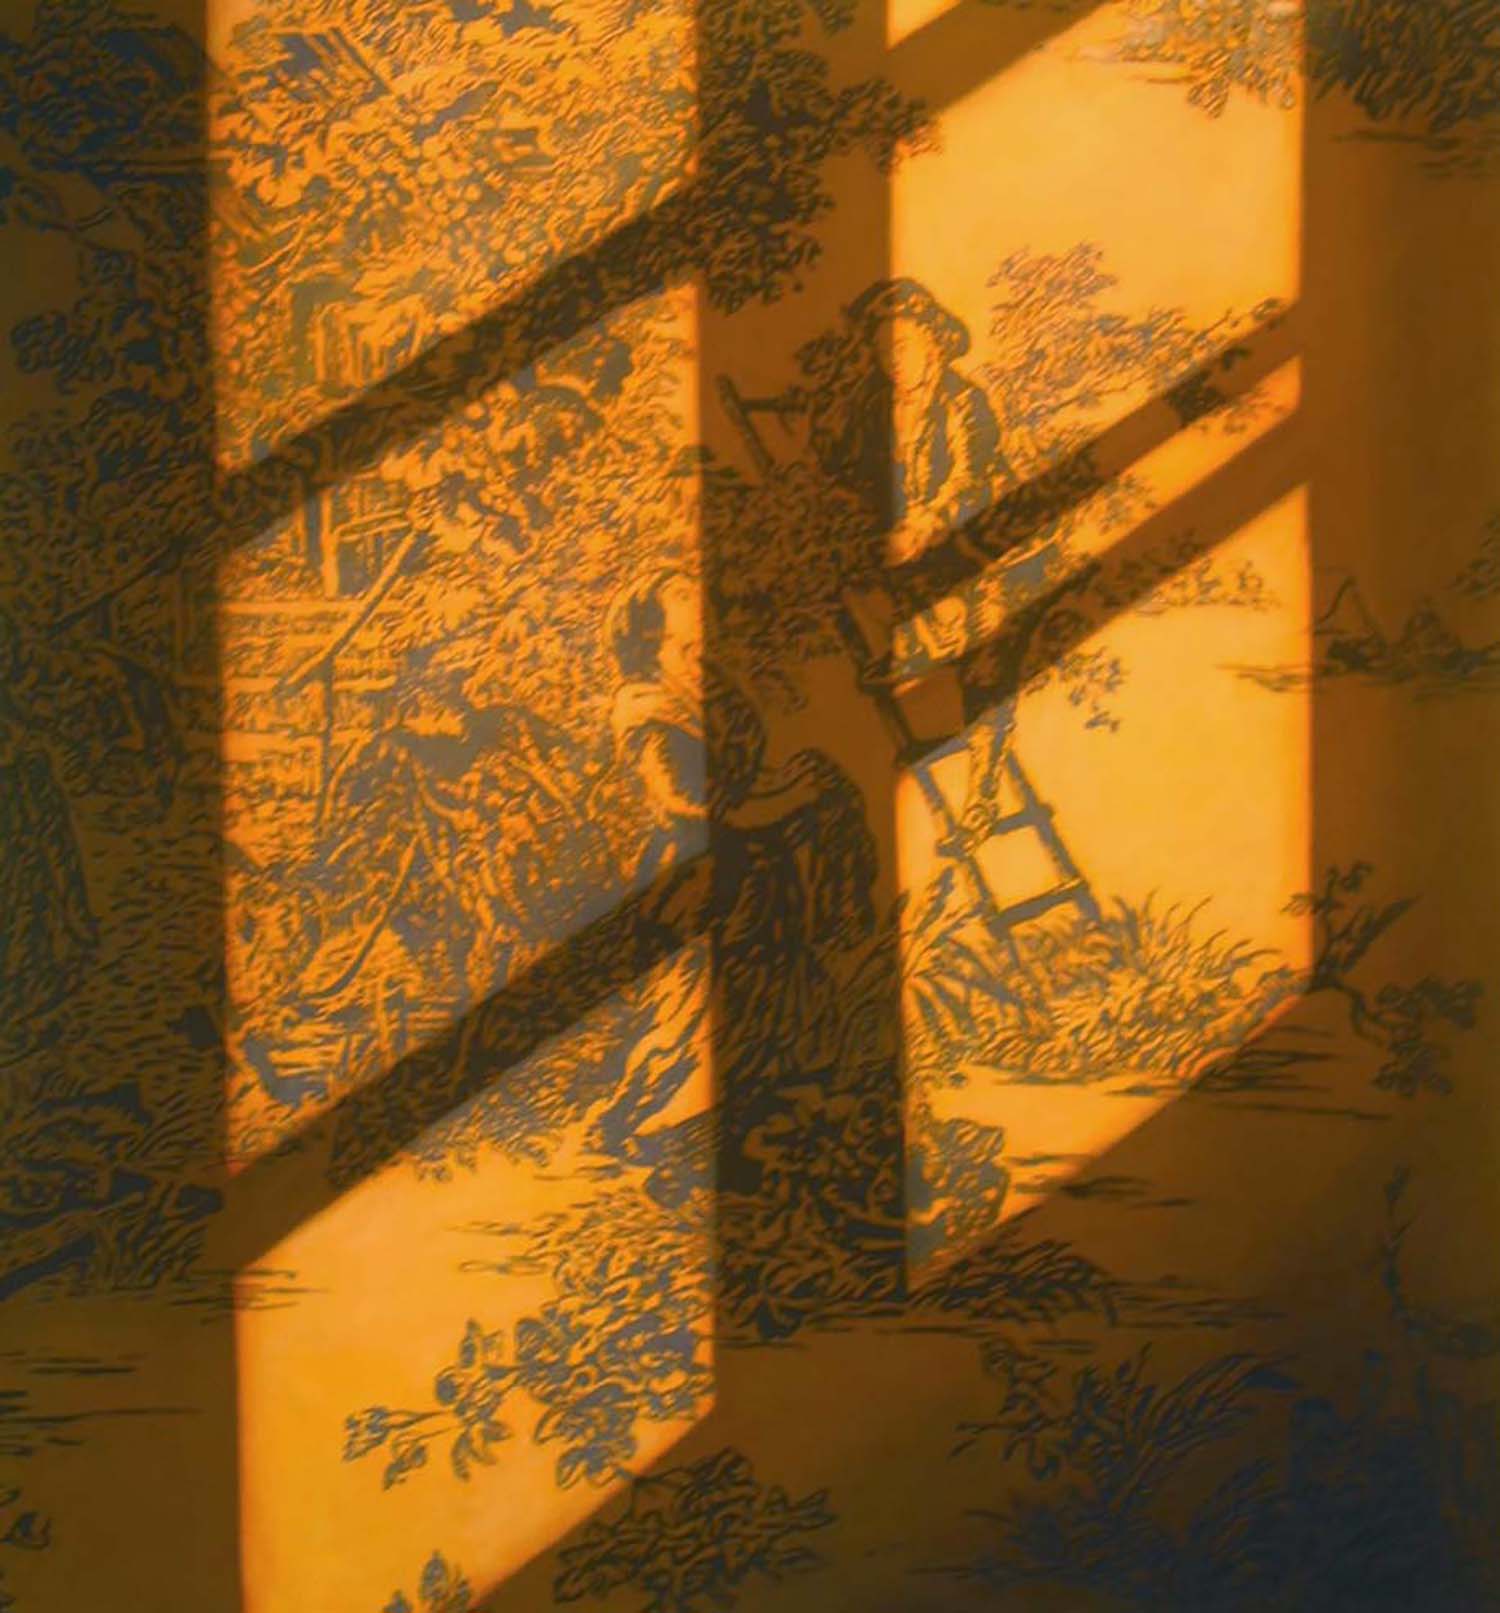   Sunlight on Toile   2004  Oil on canvas  72 x 66 inches       